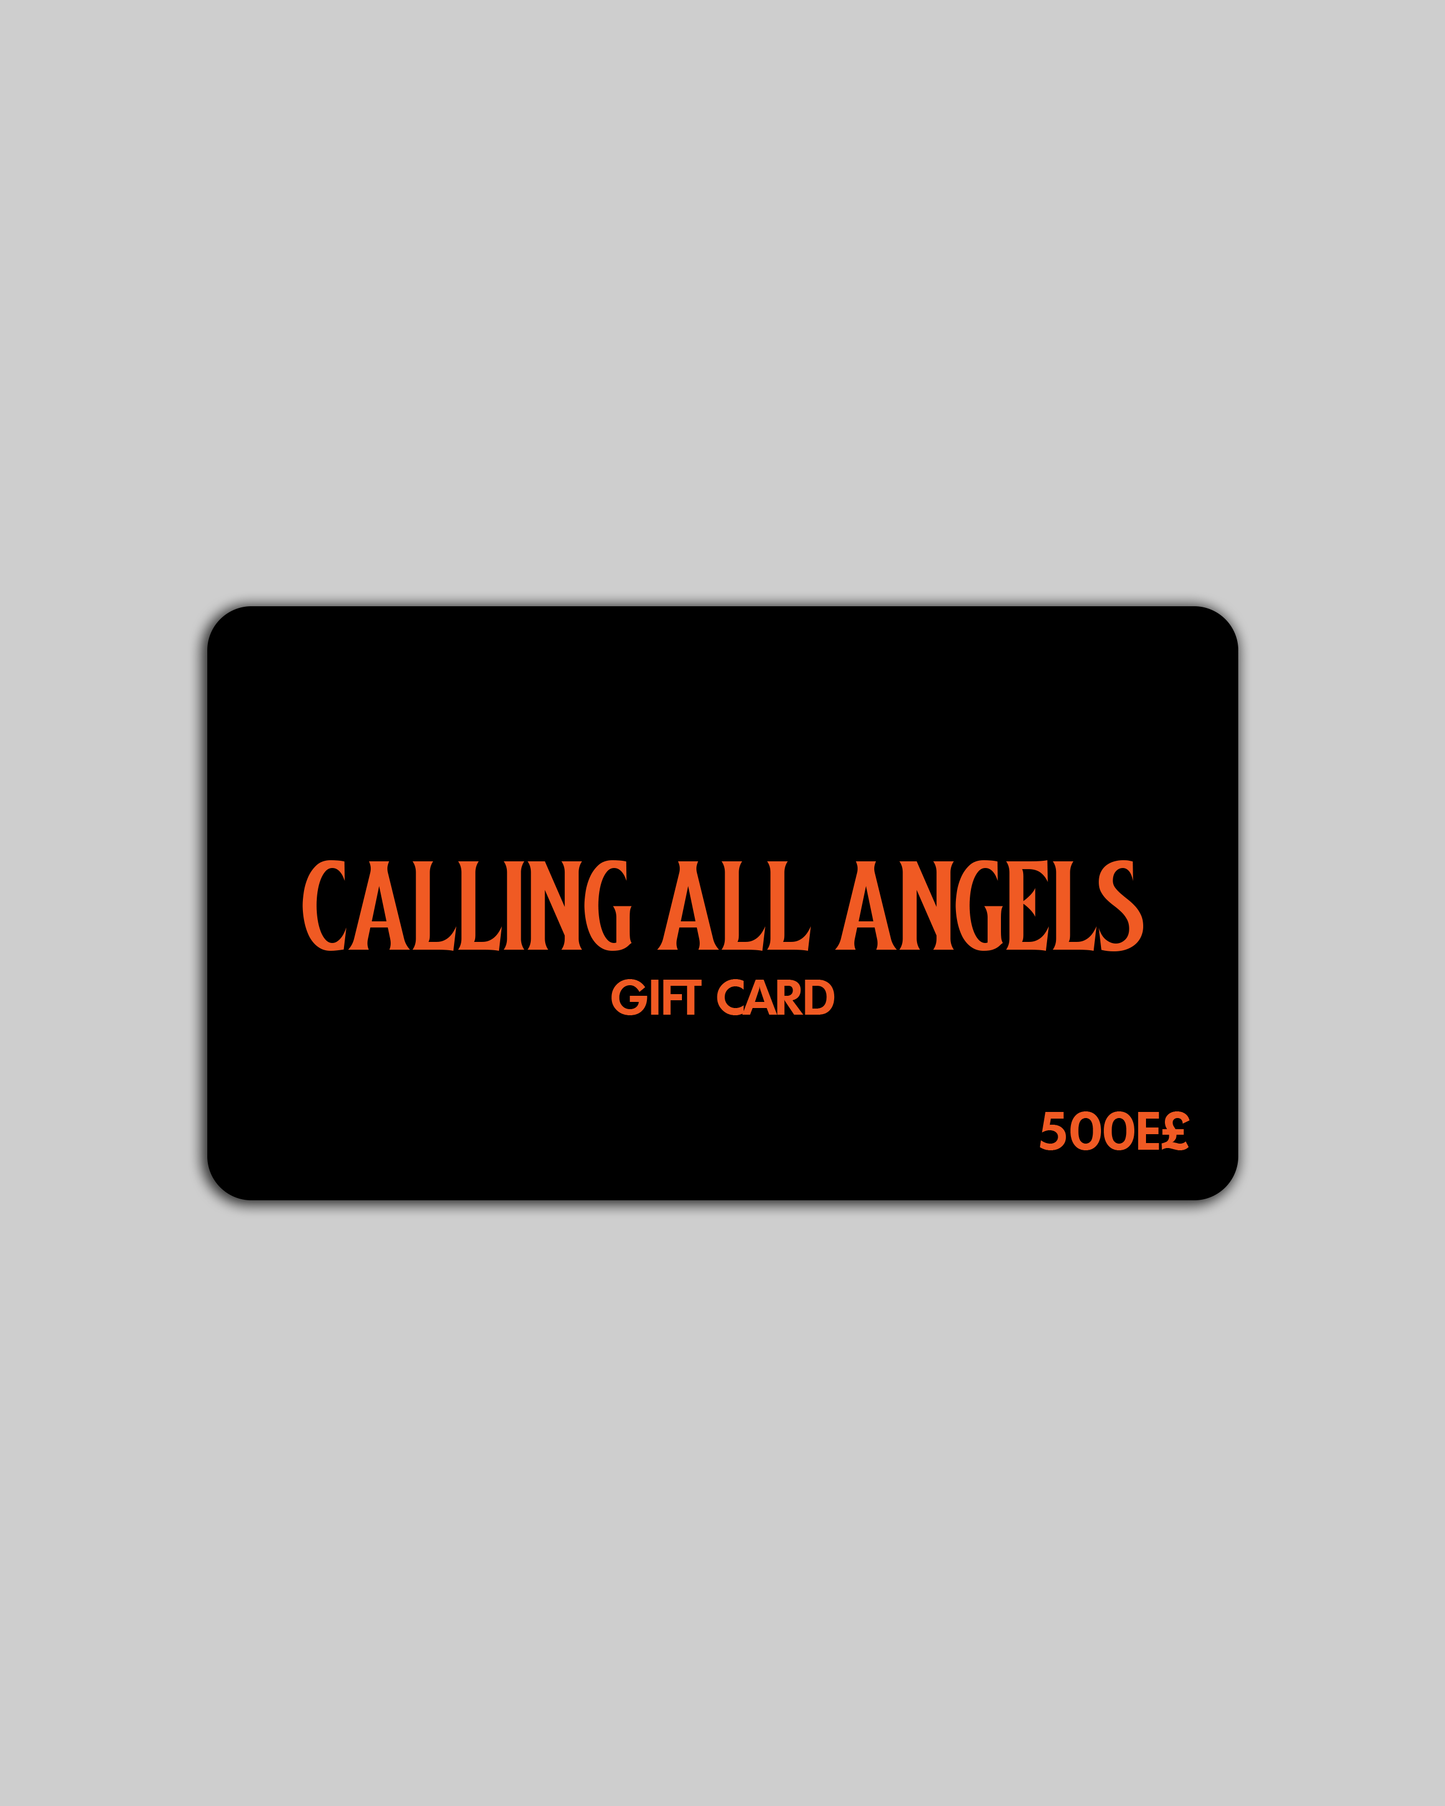 "CALLING ALL ANGELS" GIFT CARD